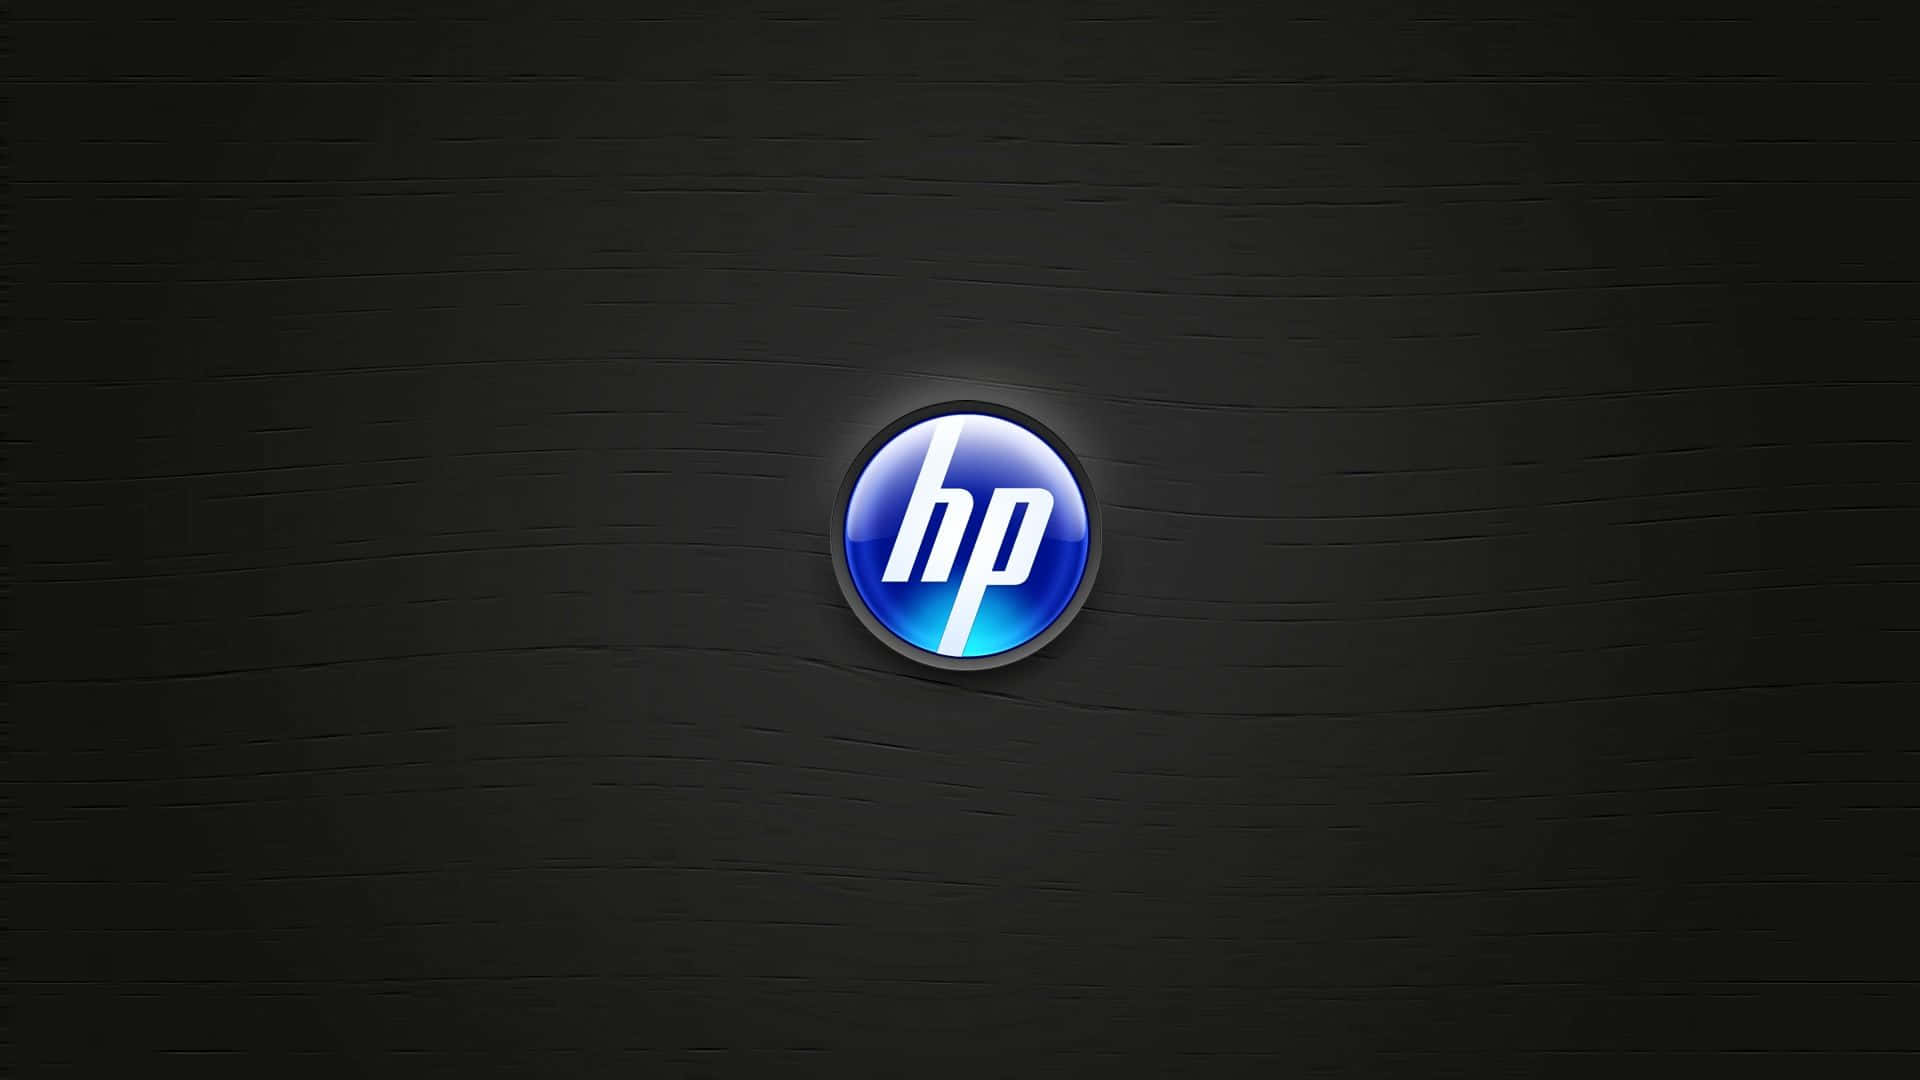 Upgrade Your Home PC with an HP Desktop Wallpaper